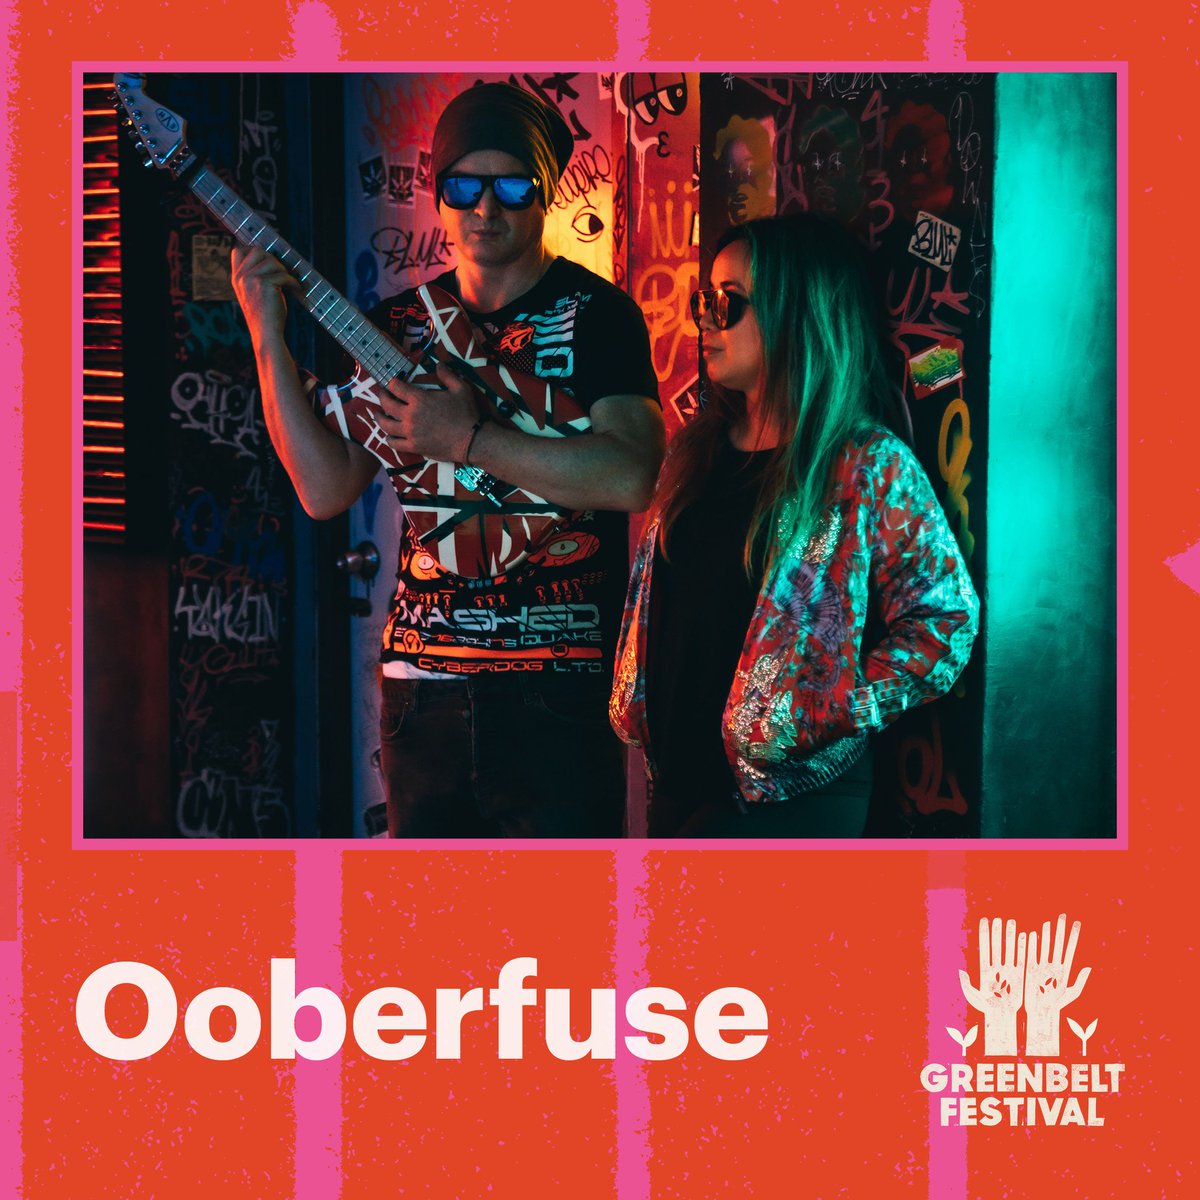 Part of the joy of this ‘slow release’ approach to our line-up this year is being able to take a moment to celebrate the diversity of who we have joining us this summer. @ooberfuse is one such delightful enigma.